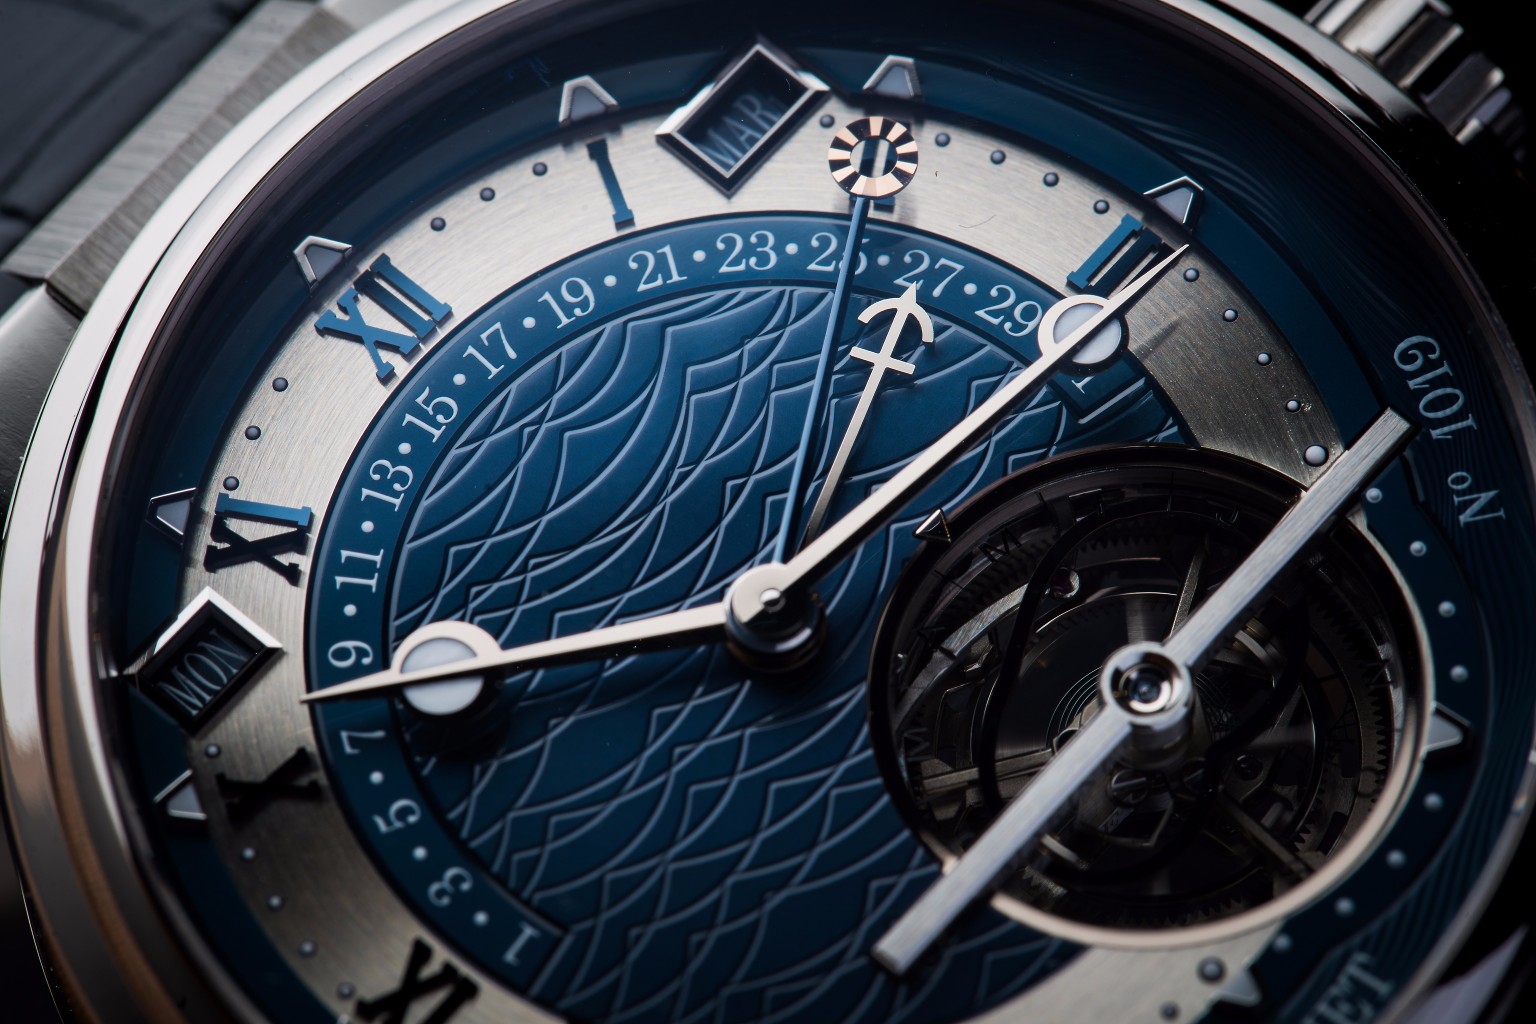 Breguet Introduces The Innovative New Marine Equation Marchante 5887